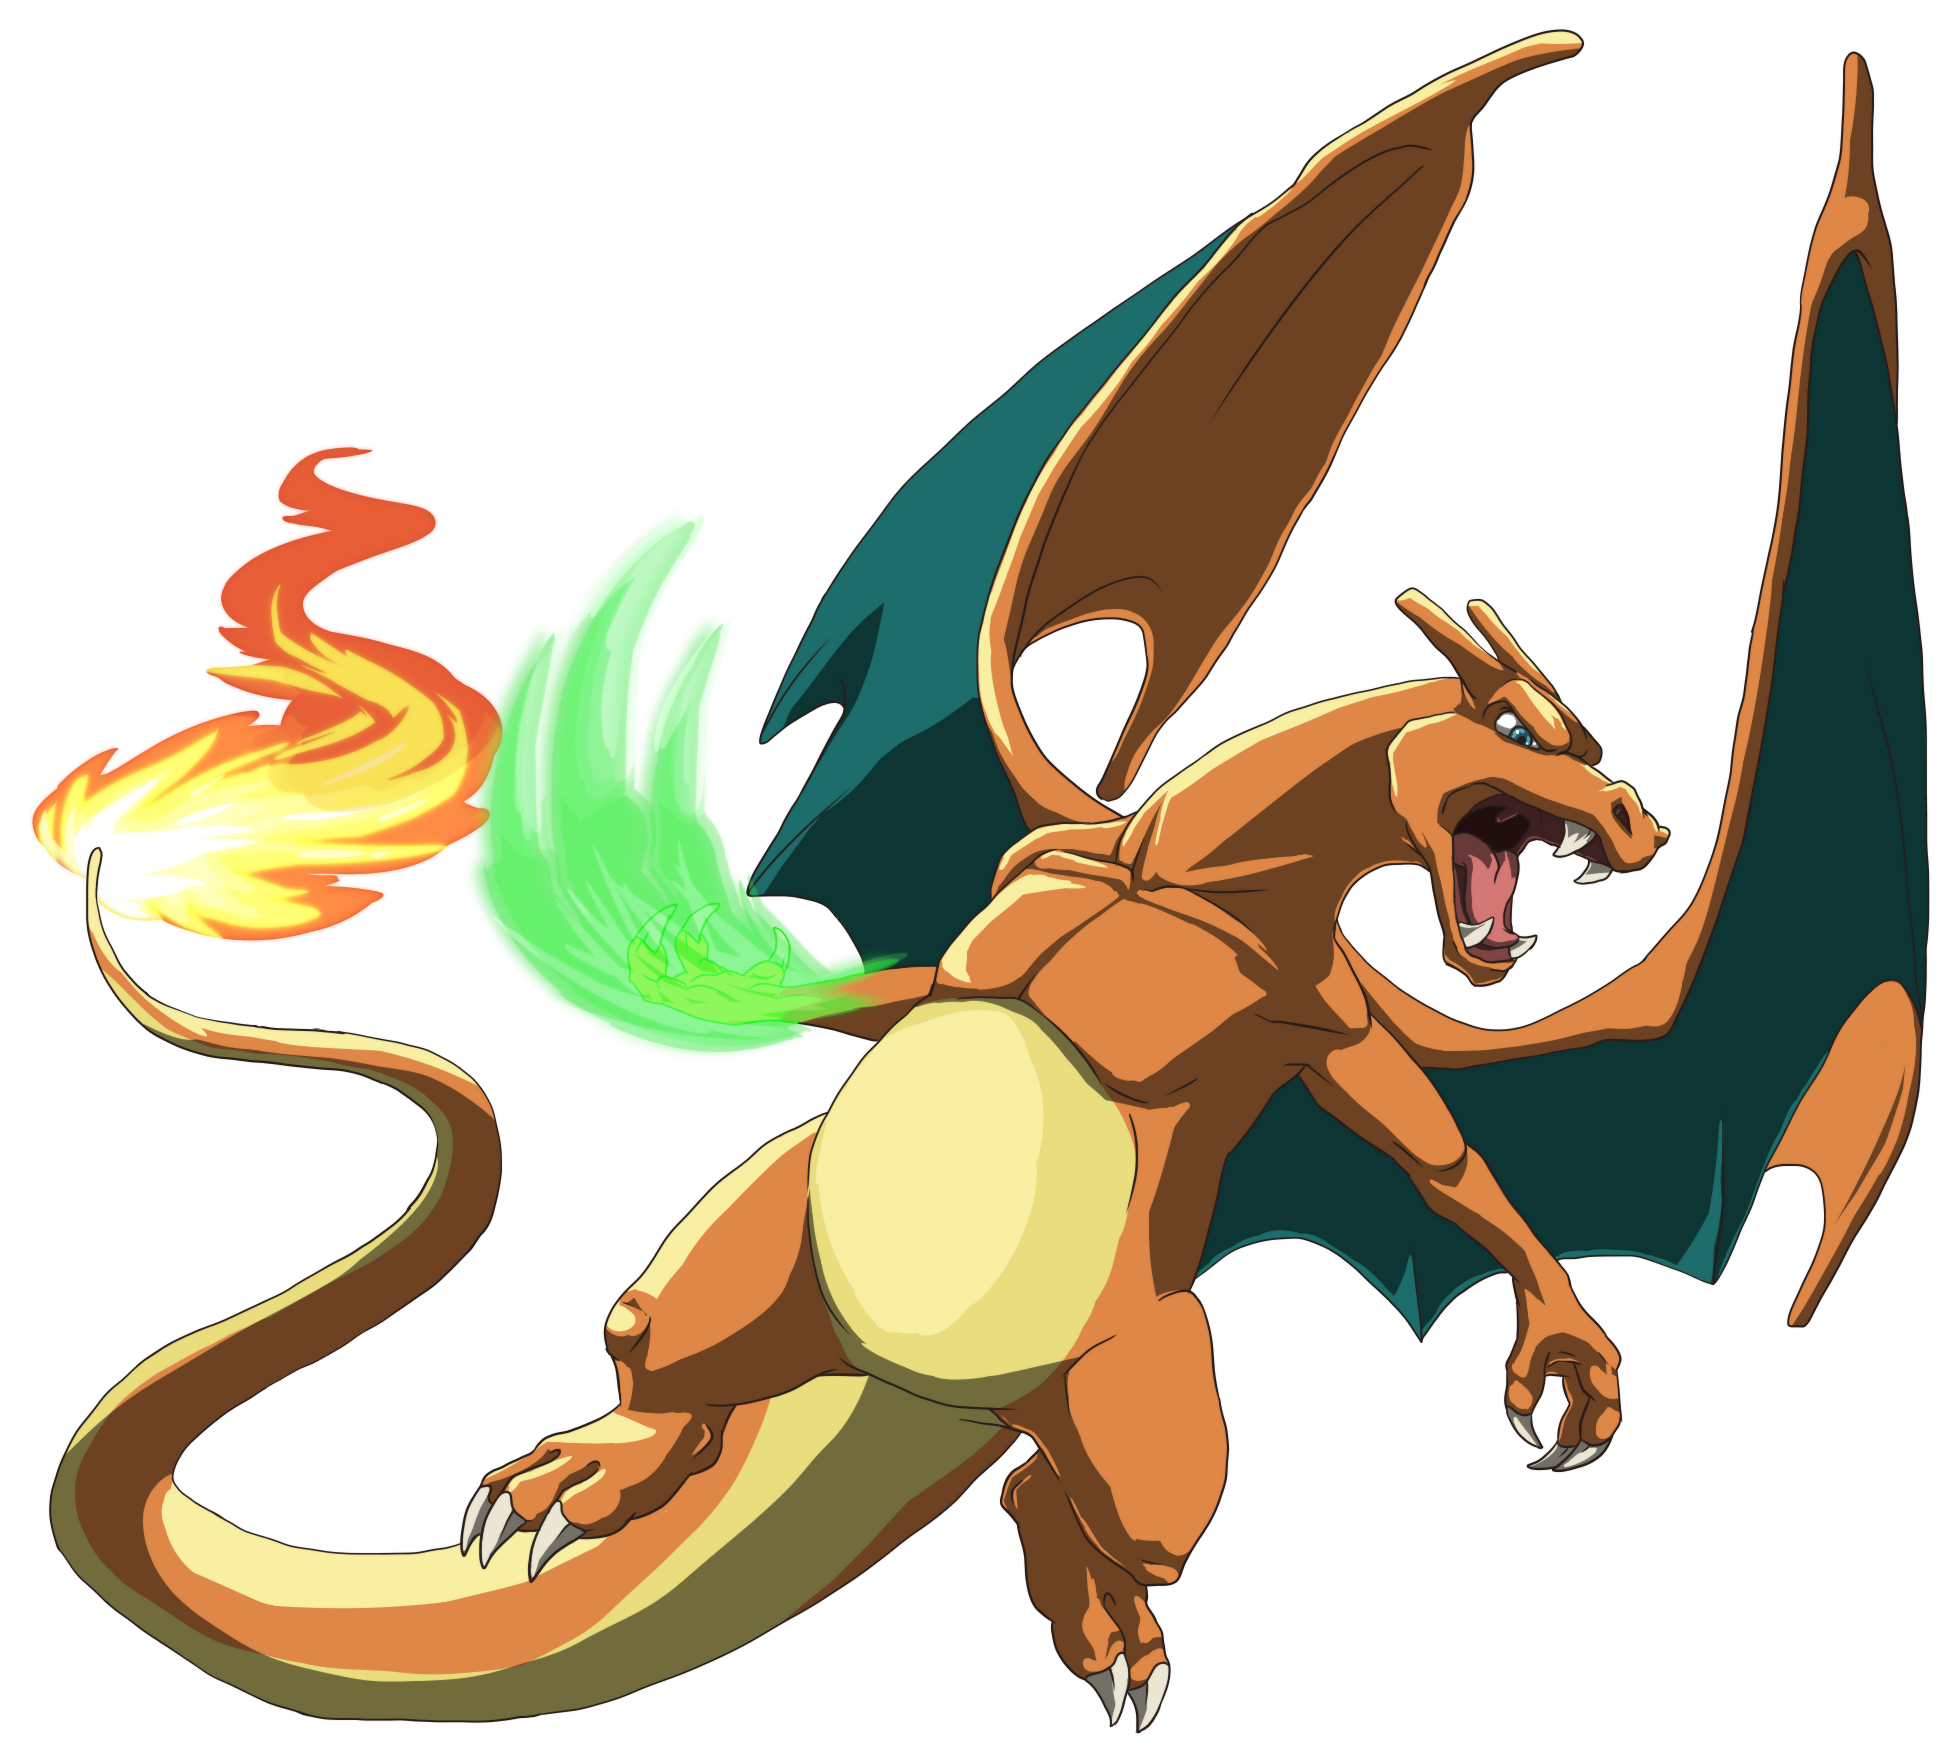 Charizard used Dragon Claw (Pokemon Tribute on Game-Art-HQ.com by AncientDragoness)